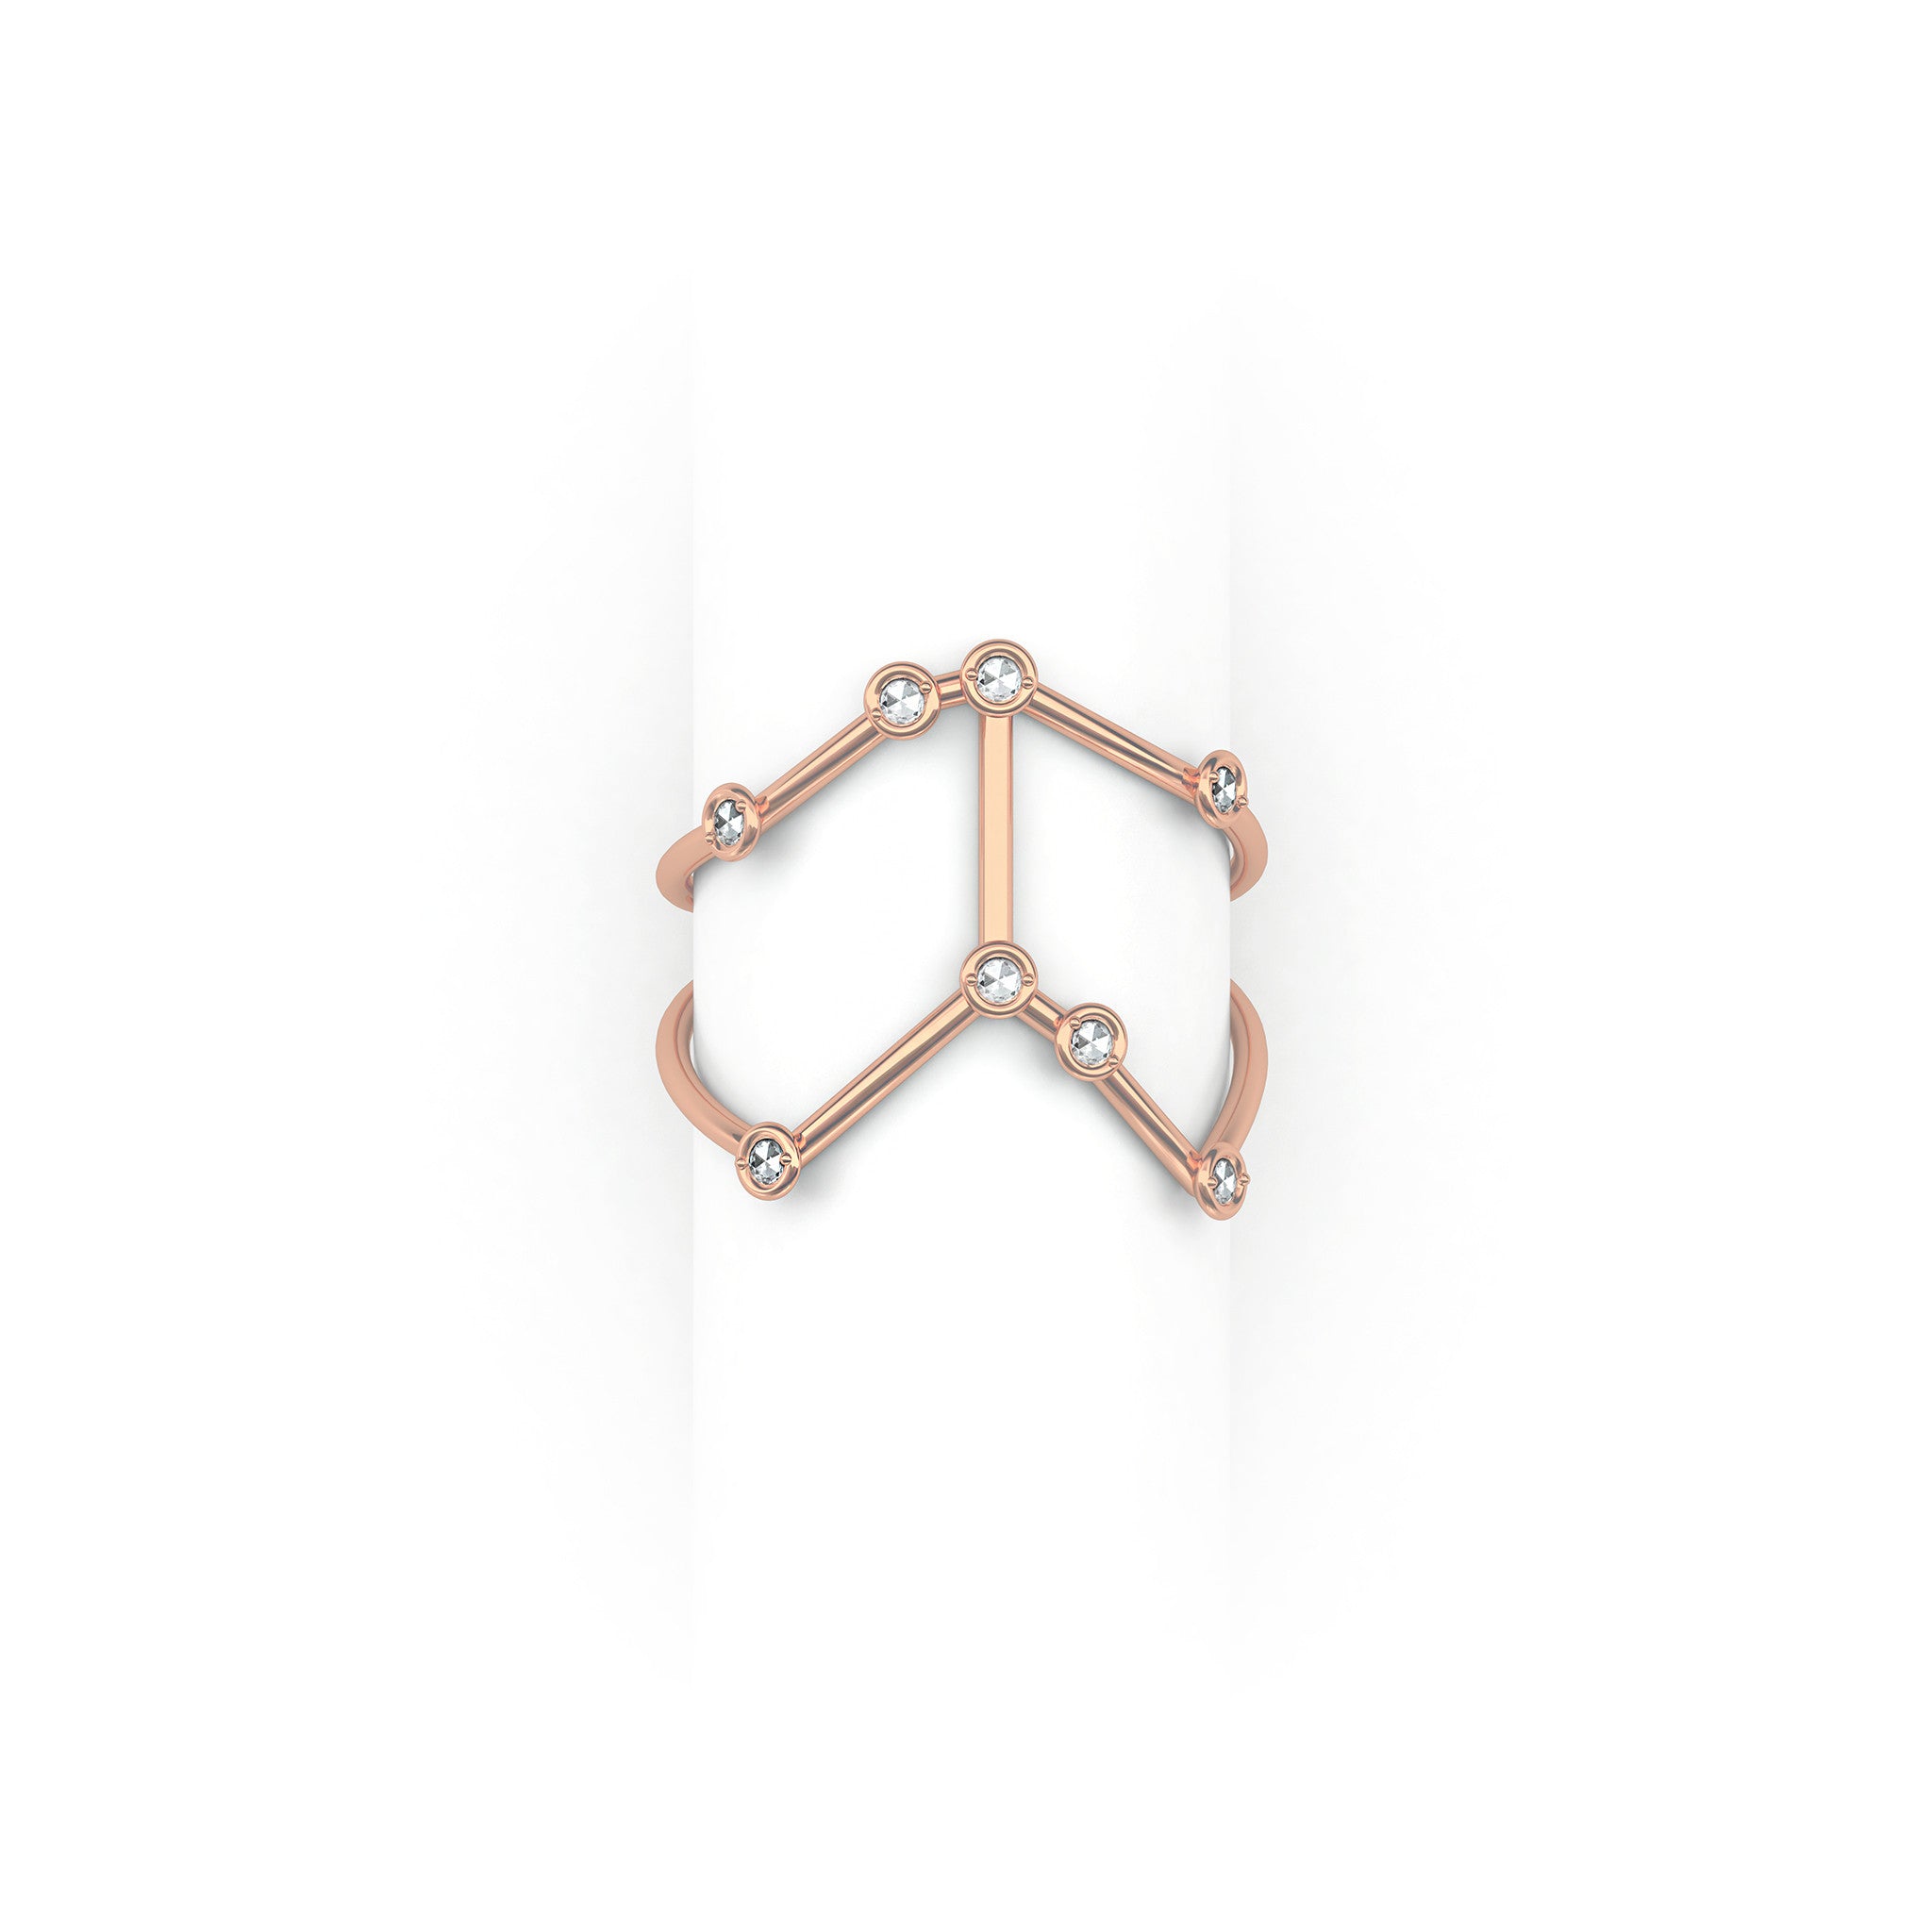 Cancer Constellation Ring